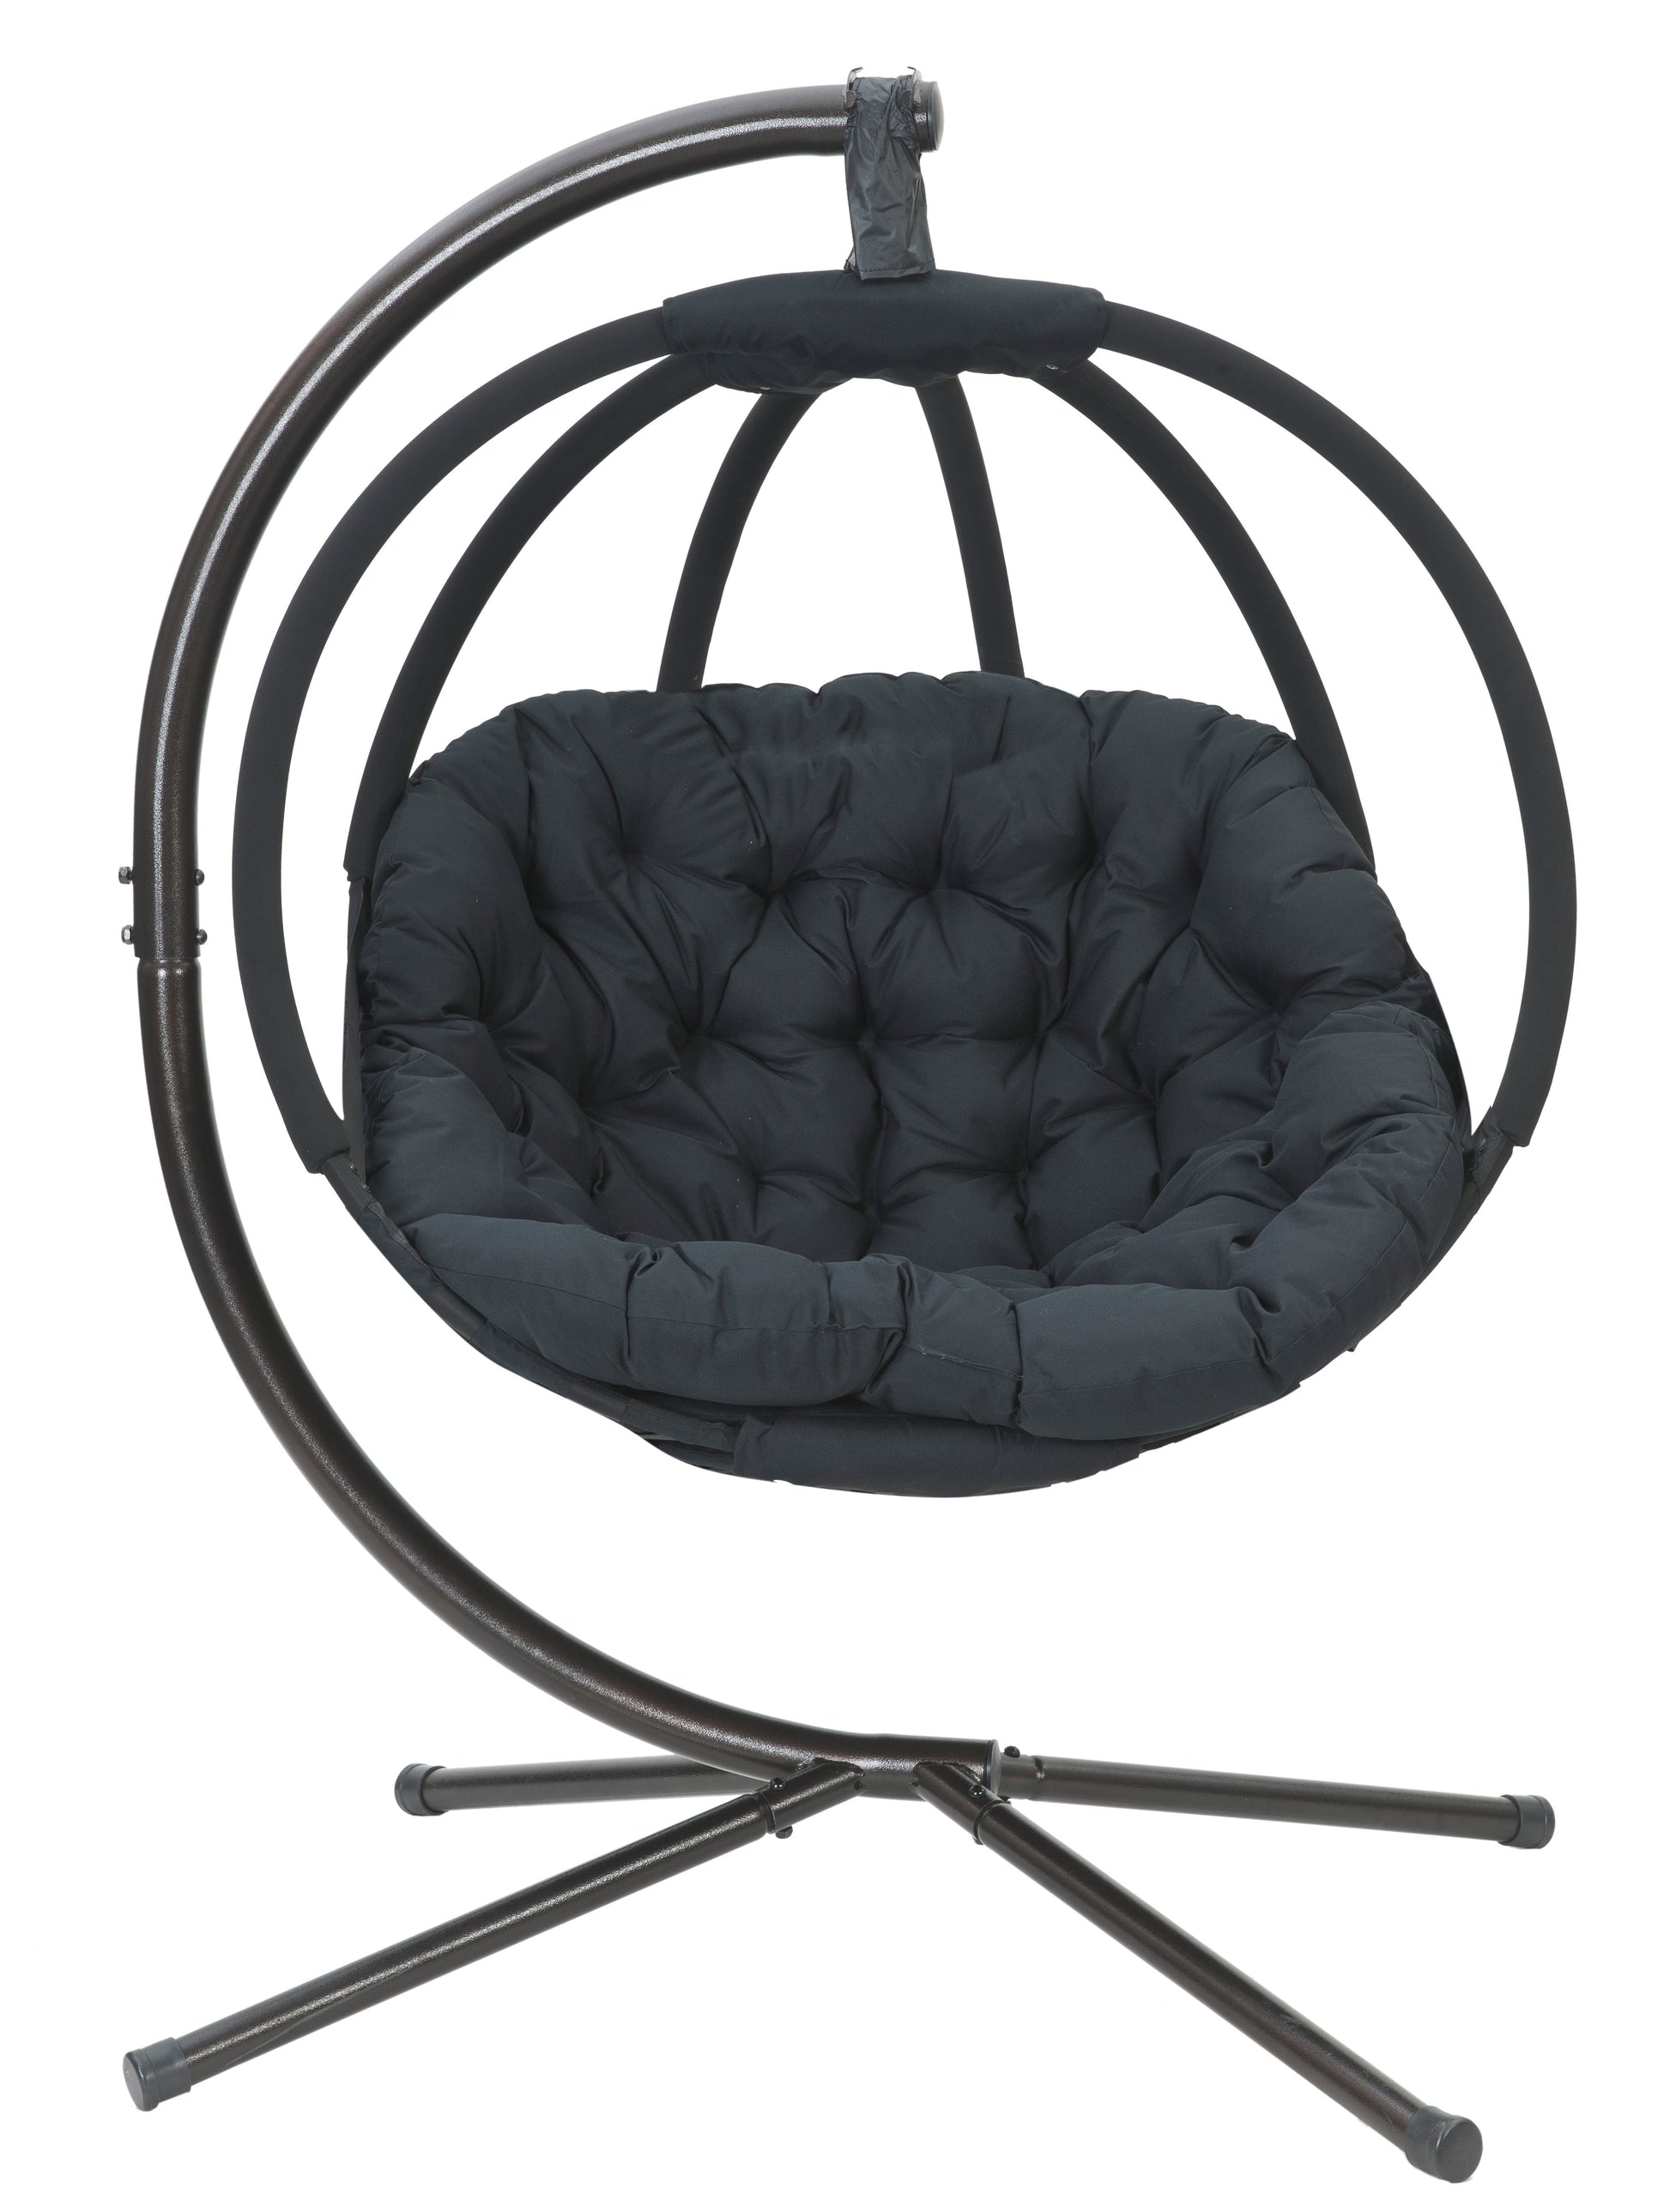 FlowerHouse Hanging Ball Chair with Stand - Overland - in black front view